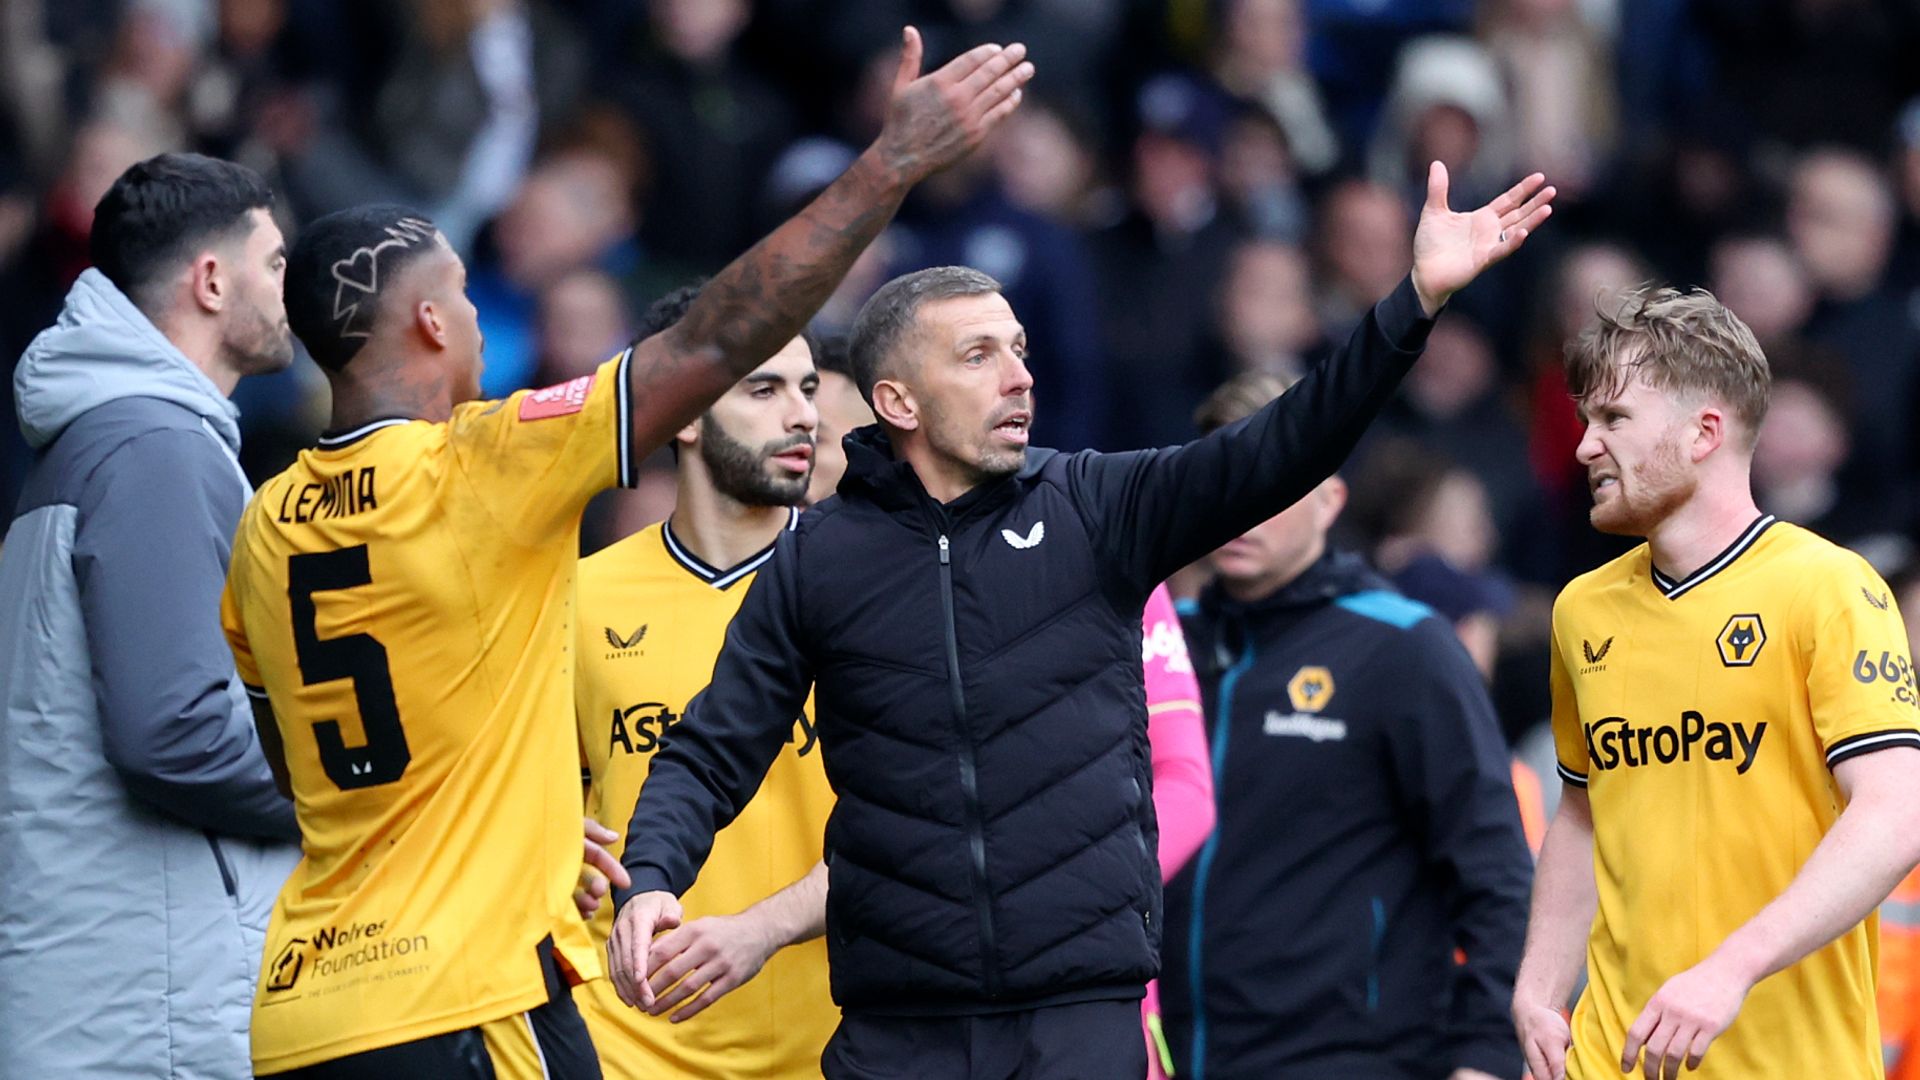 Wolves beat rivals West Brom after play suspended due to crowd trouble